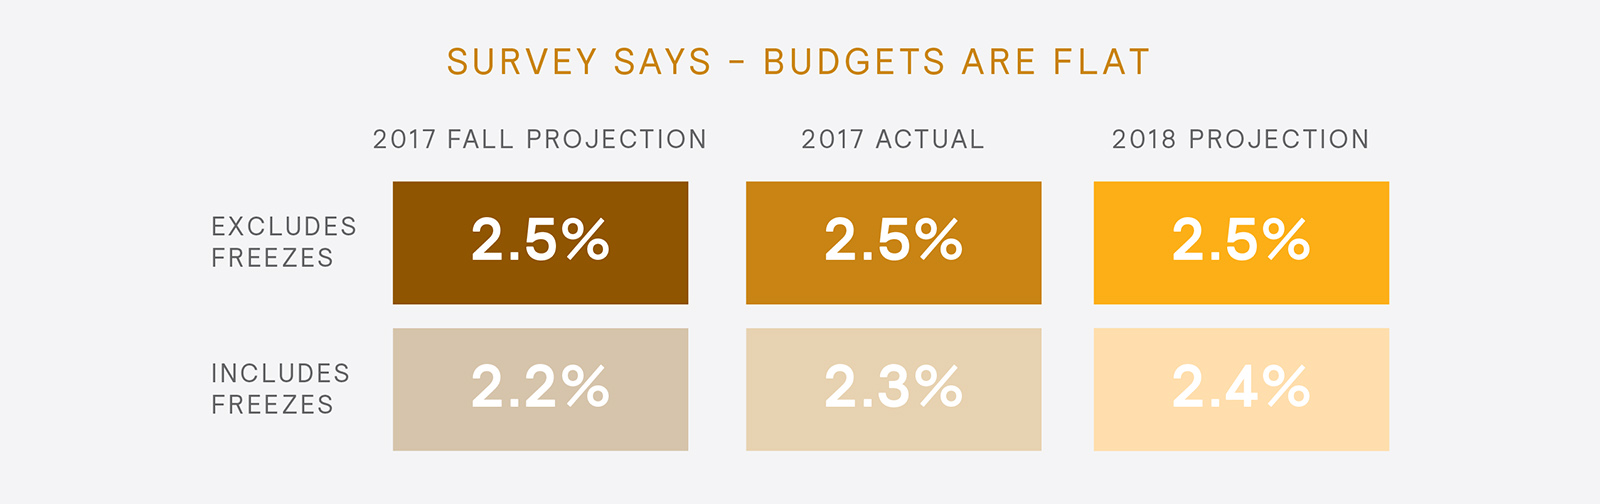 Survey Says - Budgets Are Flat